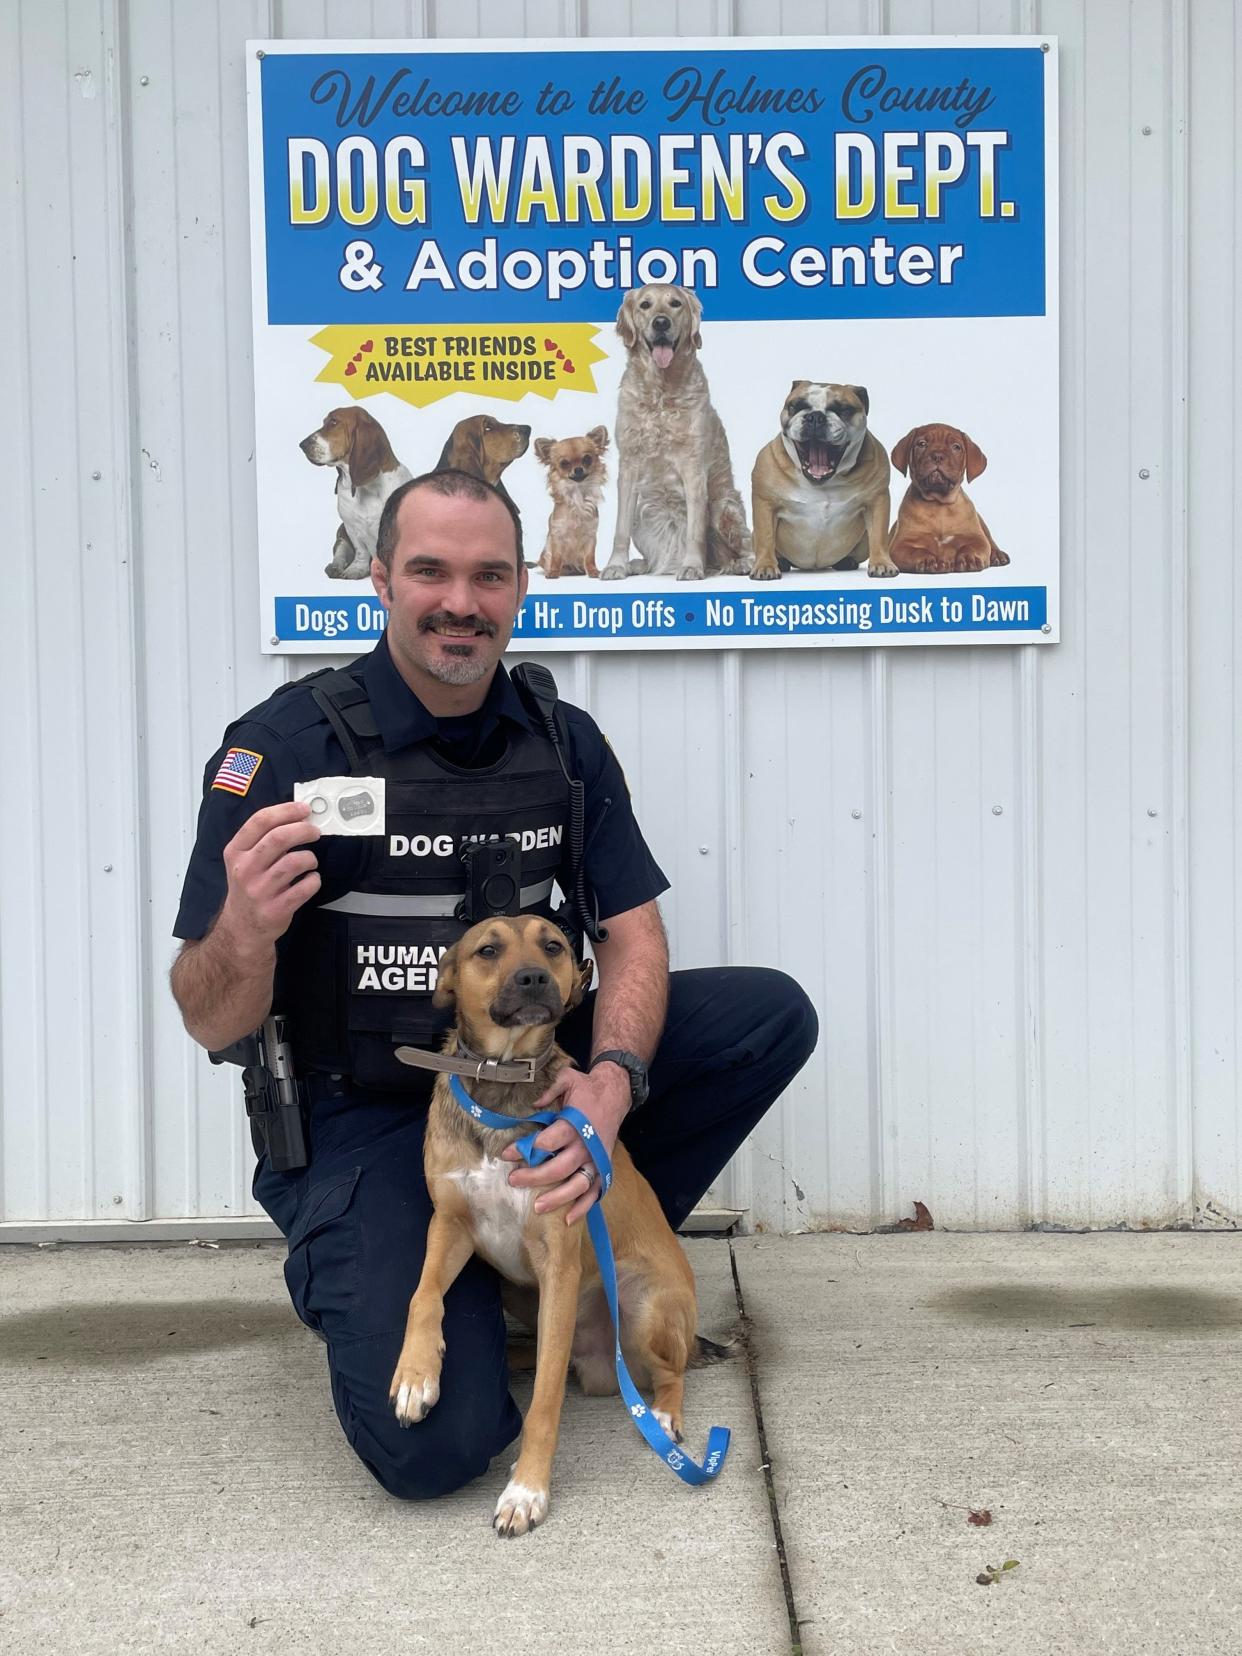 Dog Warden Jonathan Beam is pictured with Bugs, who is available for adoption at the Holmes County Dog Warden’s Department and Adoption Center.